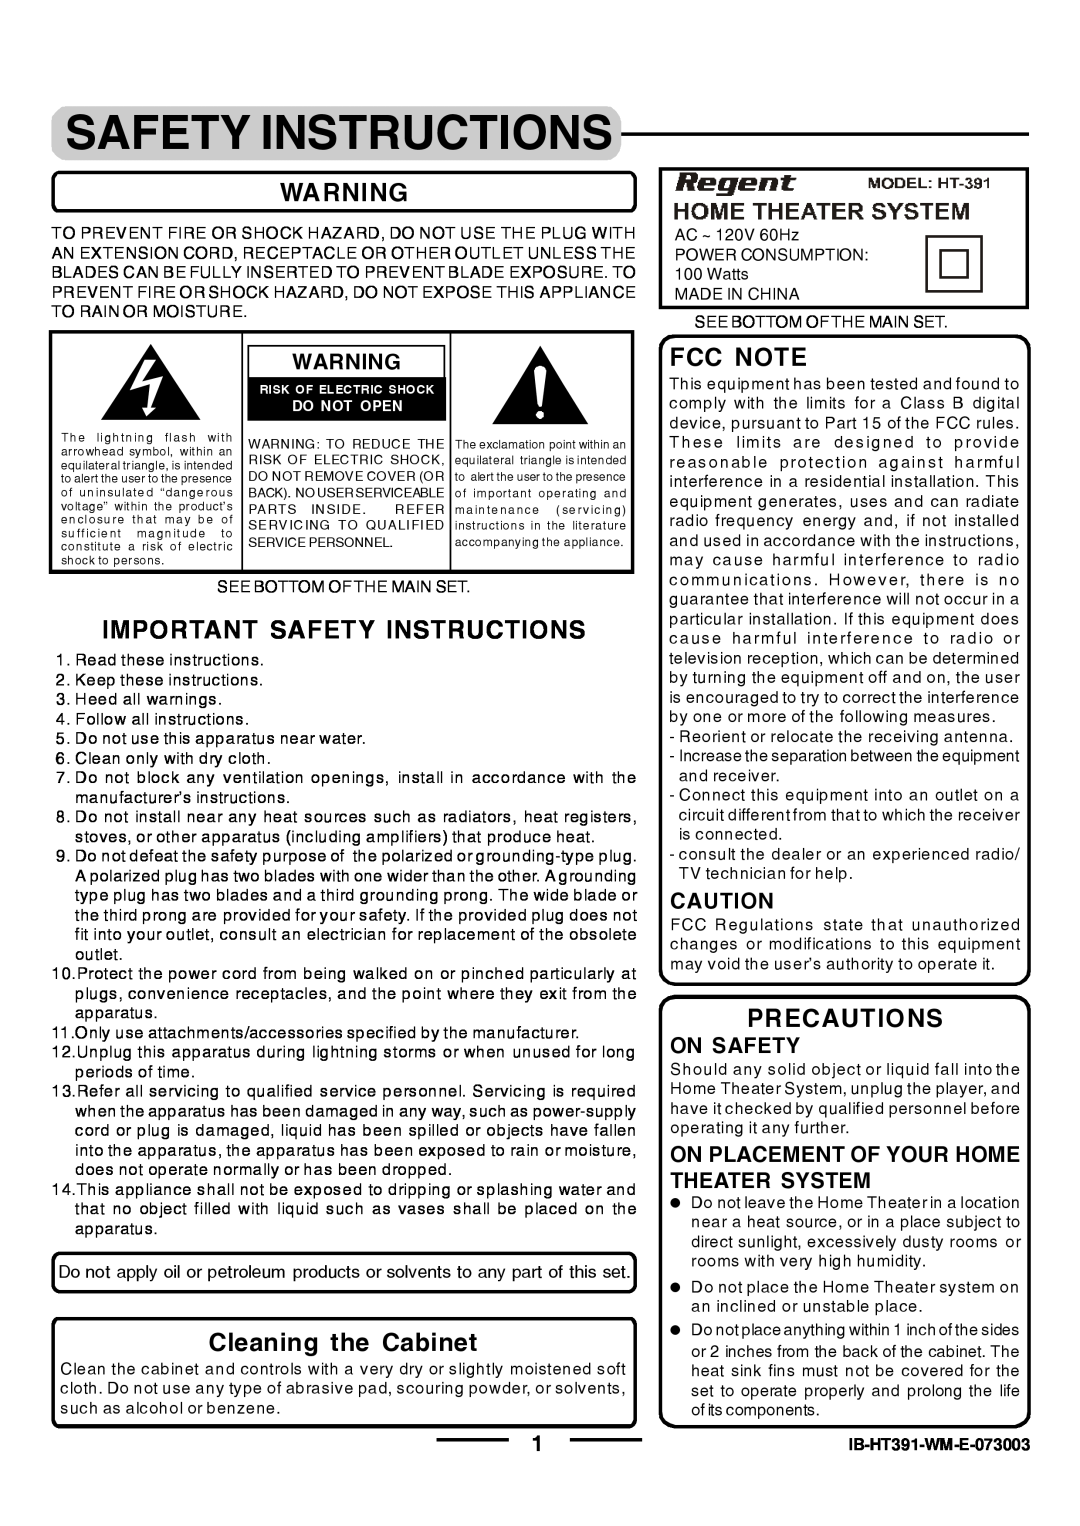 Lenoxx Electronics HT-391 manual Important Safety Instructions, Cleaning the Cabinet, Fcc Note, Precautions 